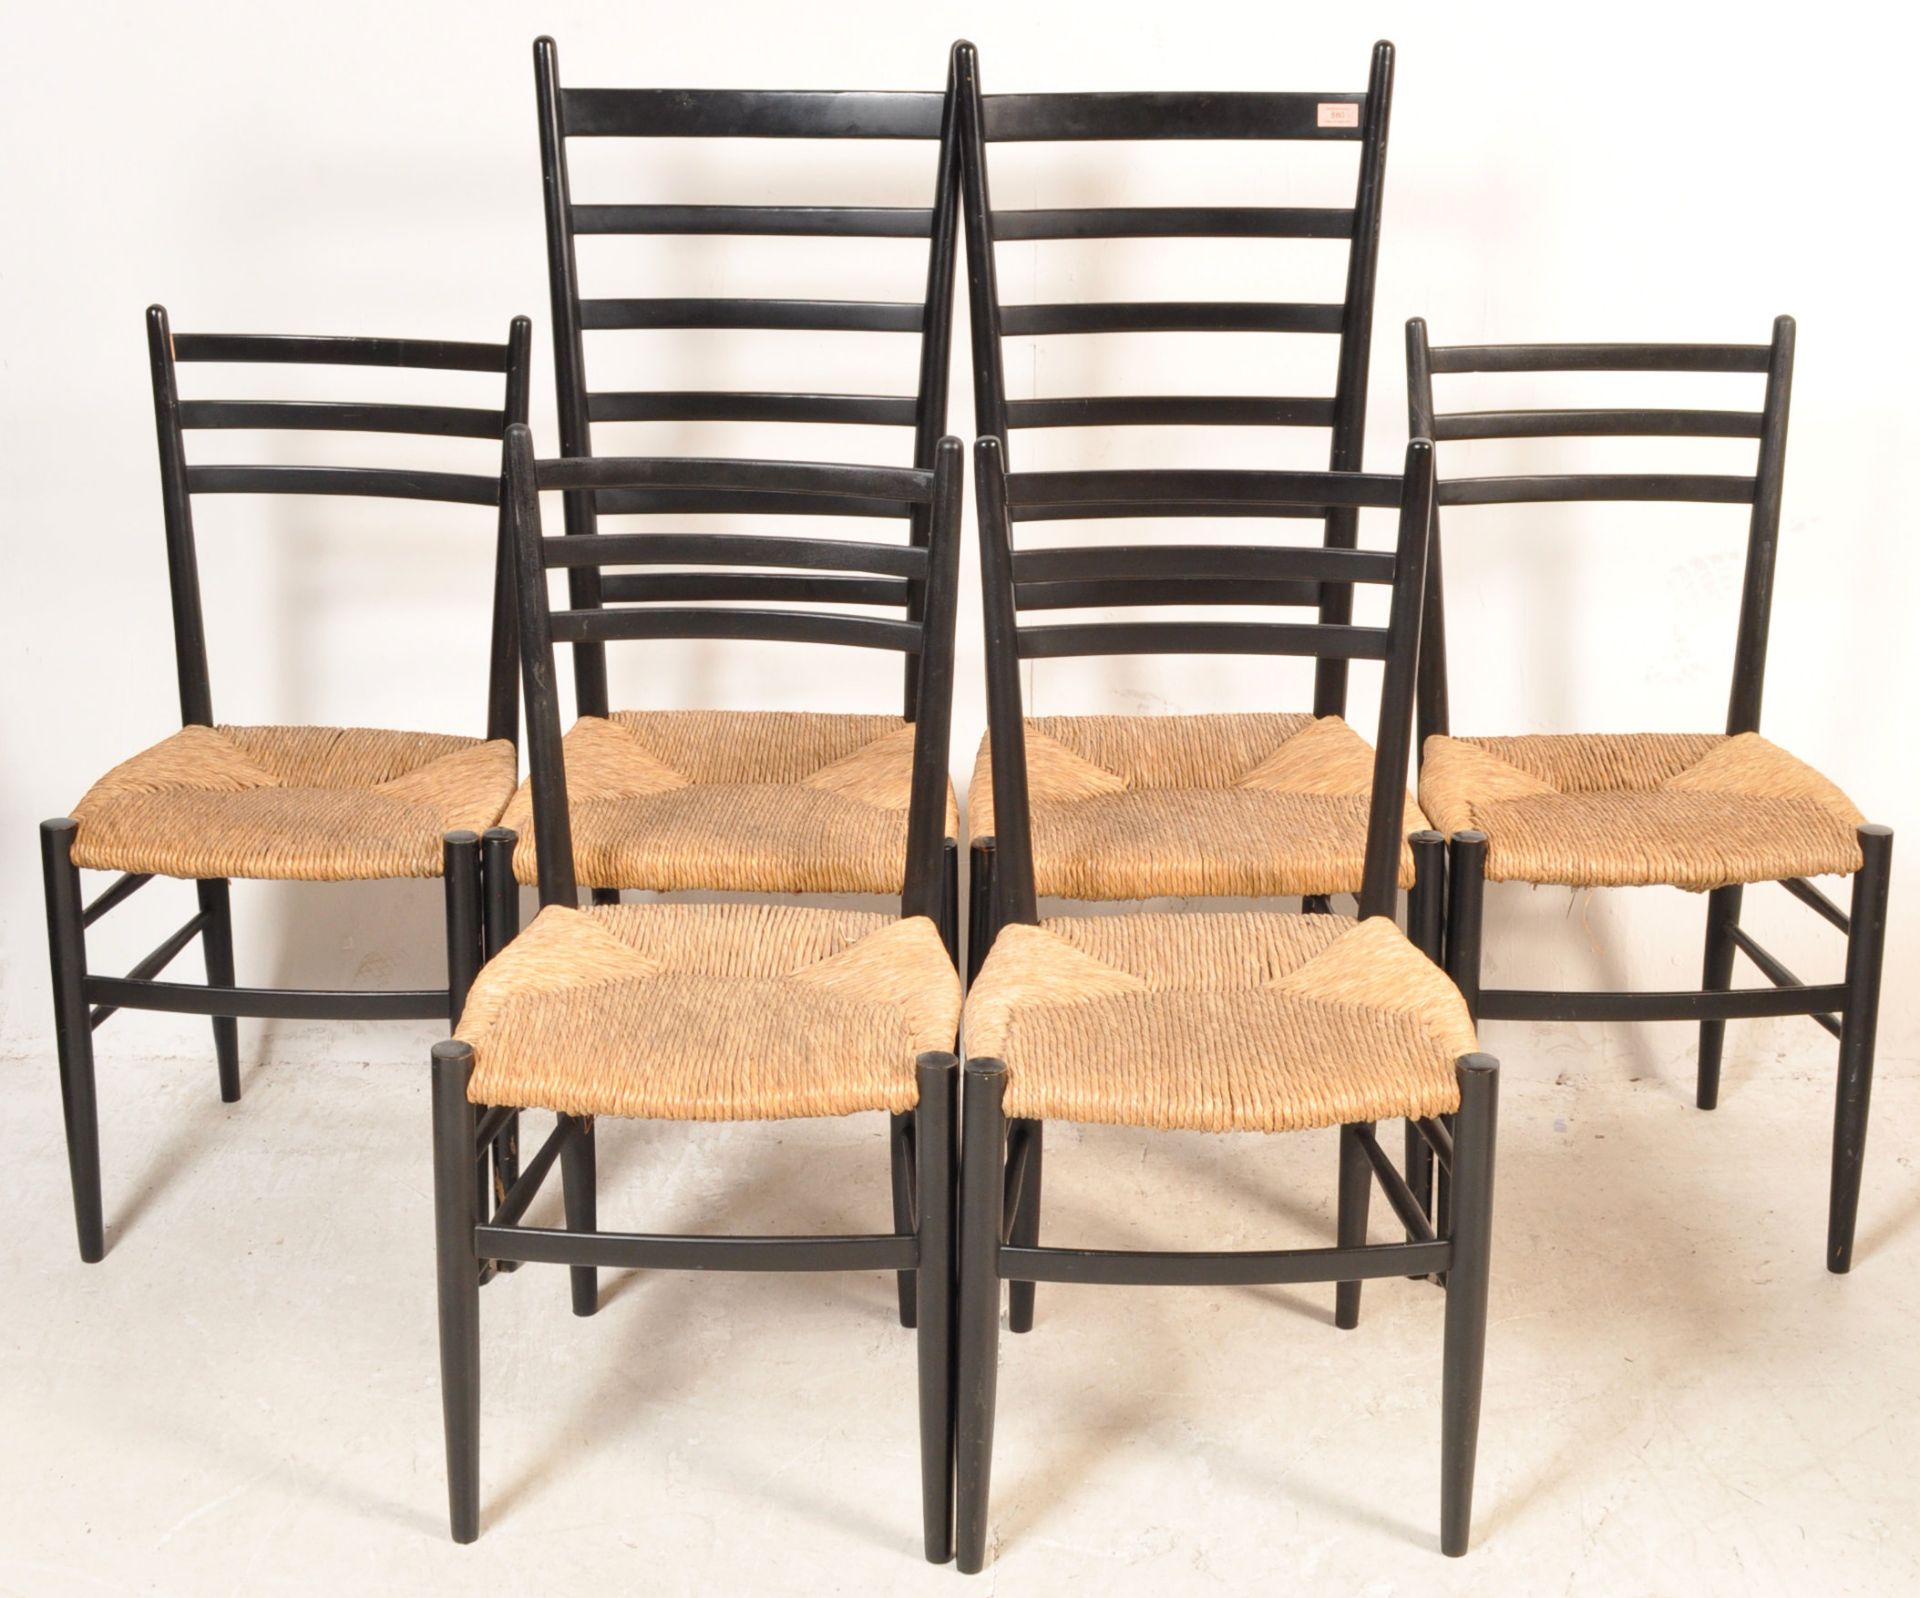 SET OF FOUR RUSH SEATS AND BLACK FRAME DINING CHAIRS - Image 2 of 6